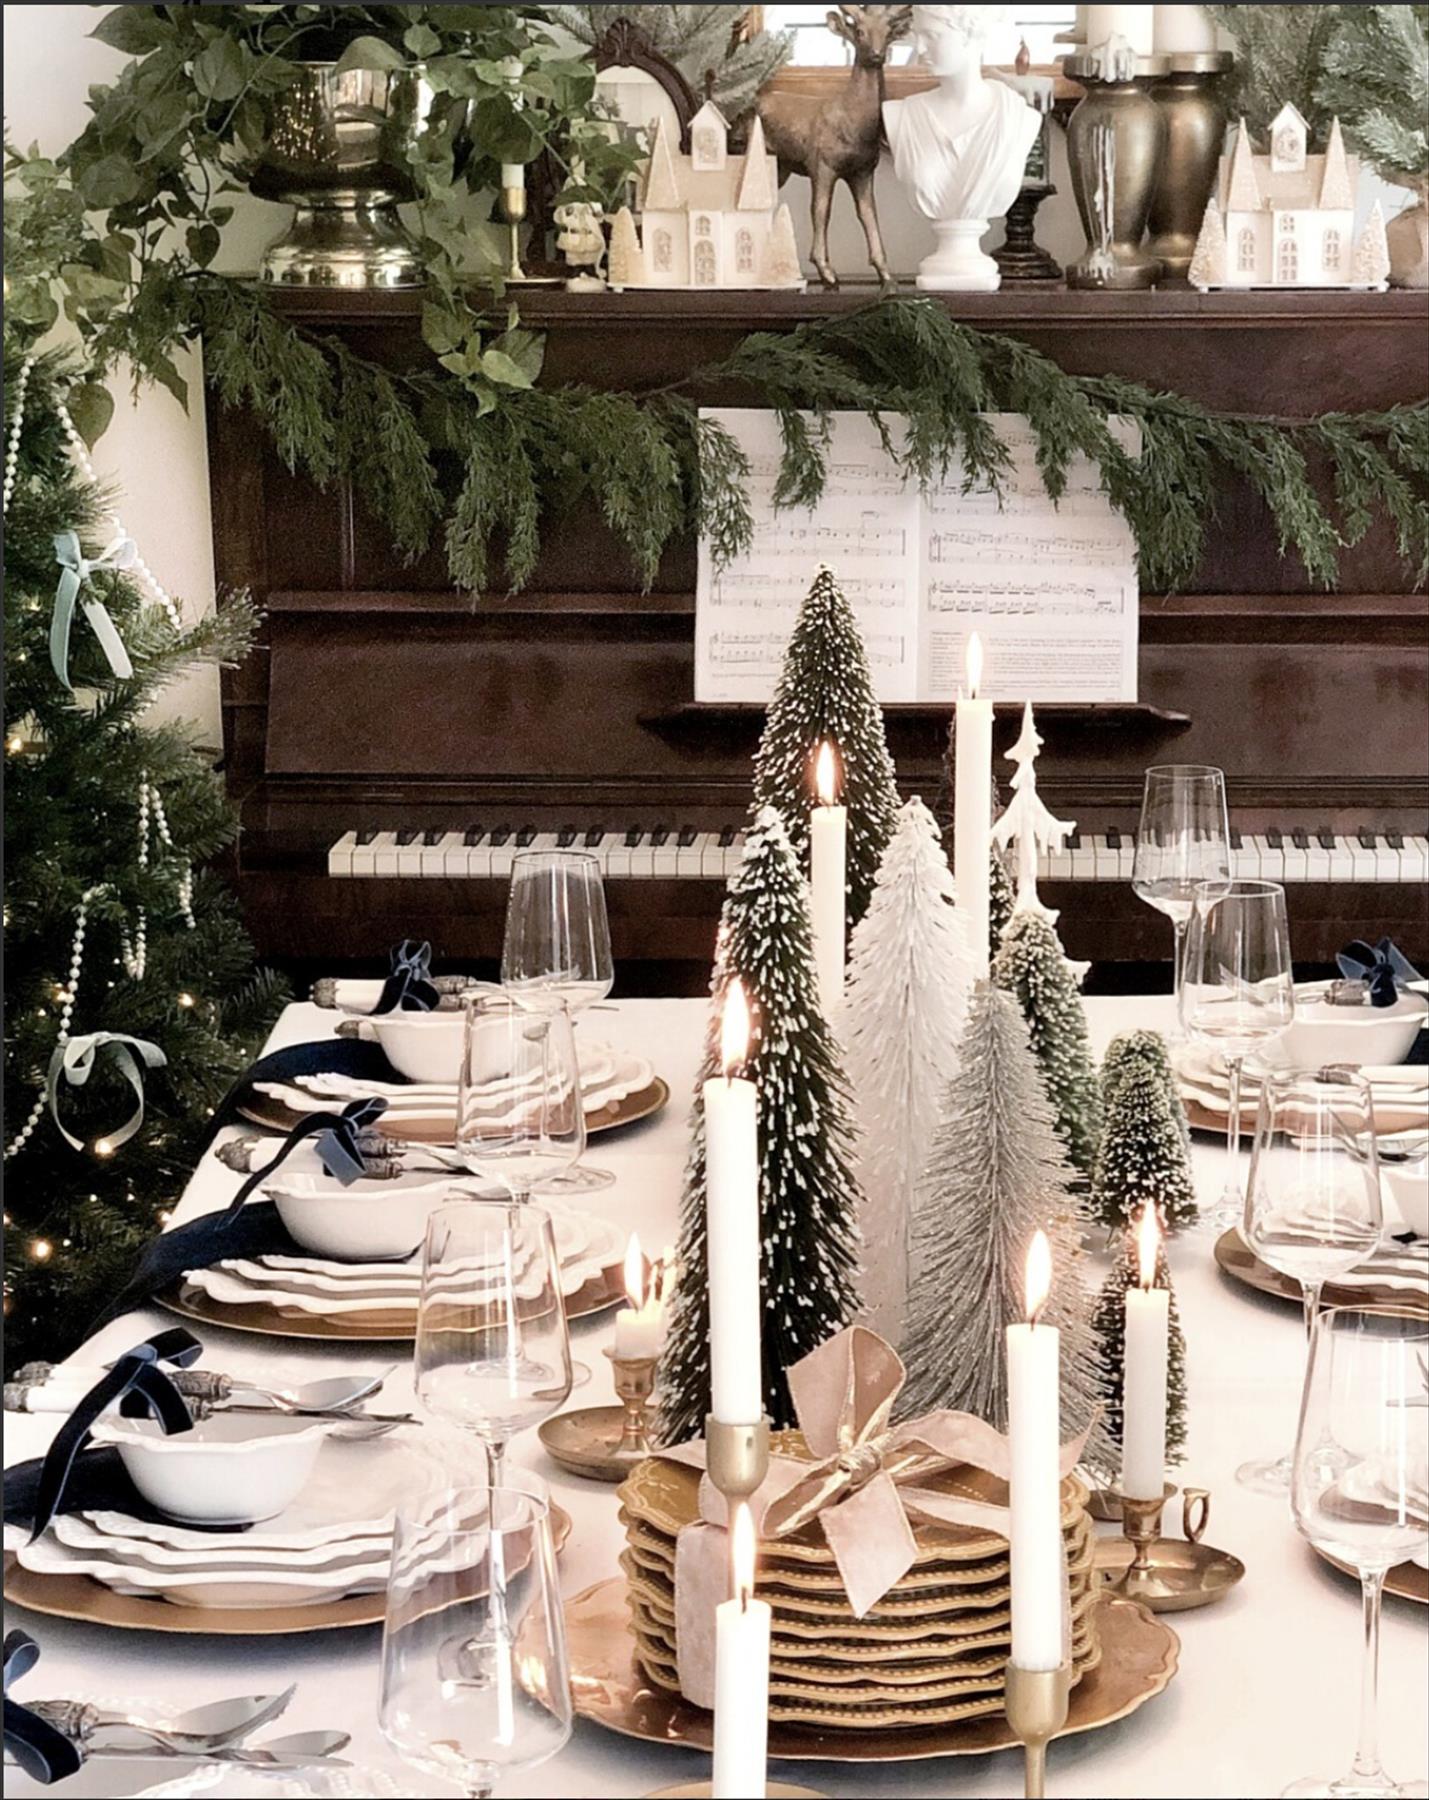 Merry Christmas Table Setting Ideas for Holiday Cheer 